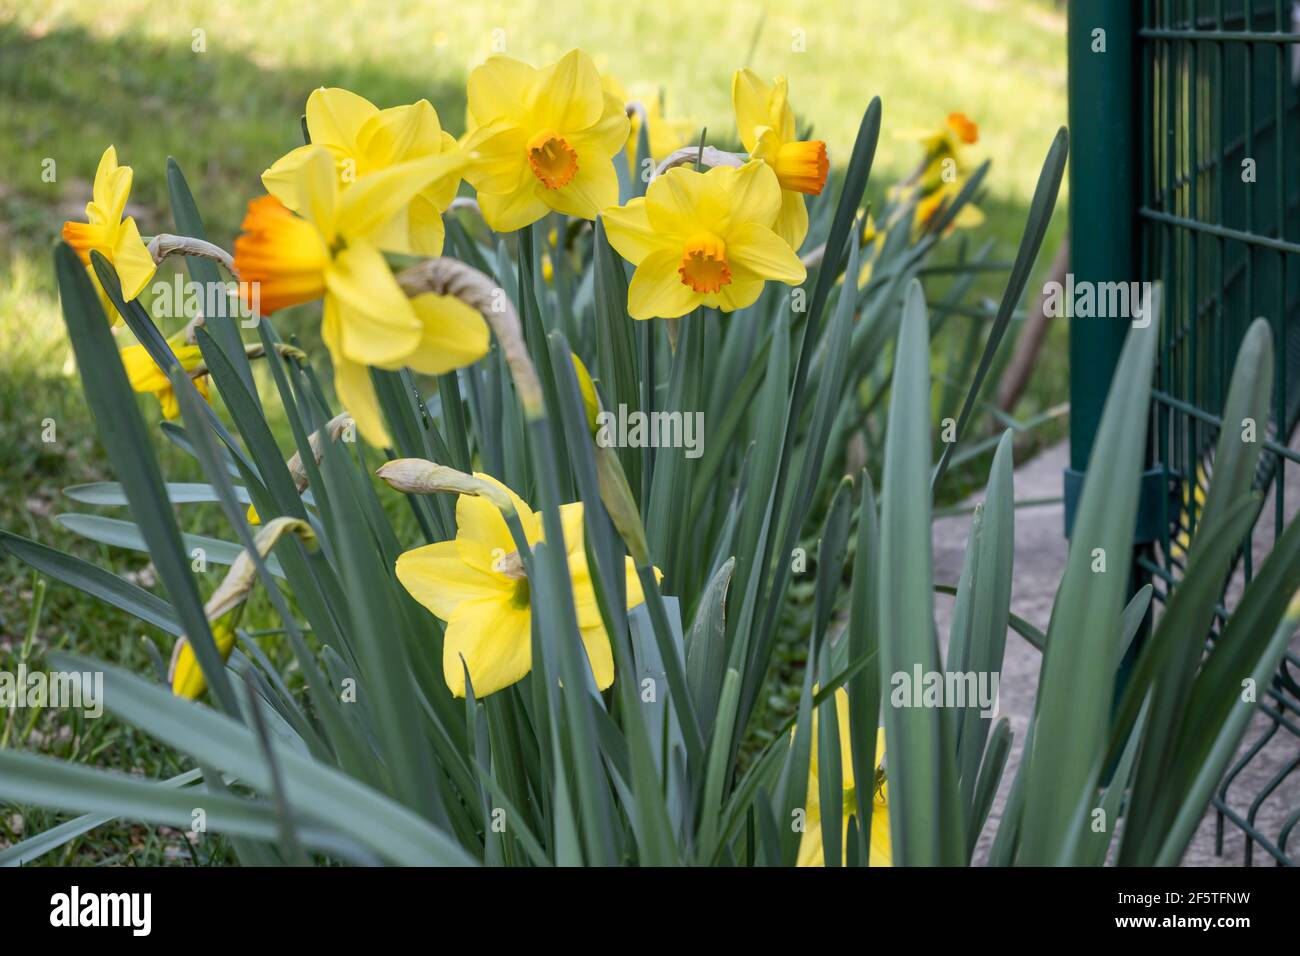 Narcissus L. is a genus of bulb plants of the Amaryllidaceae family native to Europe. Photo taken in an Italian garden.Asti, Piedmont. Stock Photo